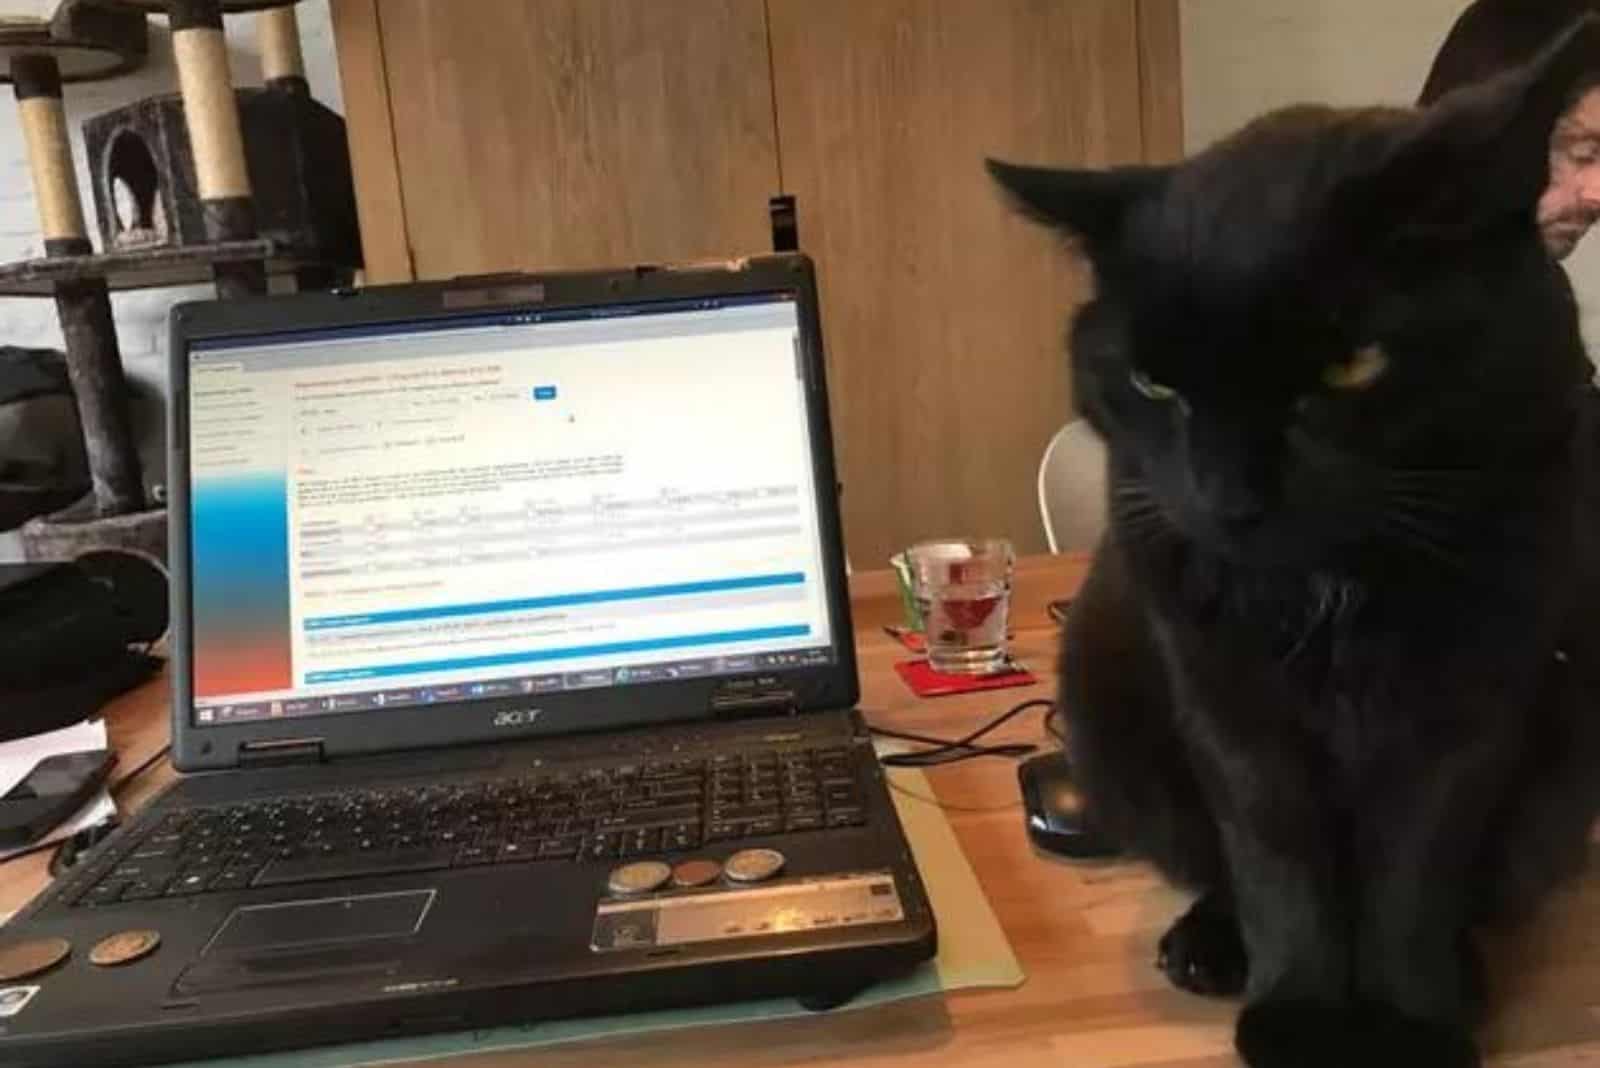 funny photo of a grumpy black cat standing next to a laptop during a zoom meeting